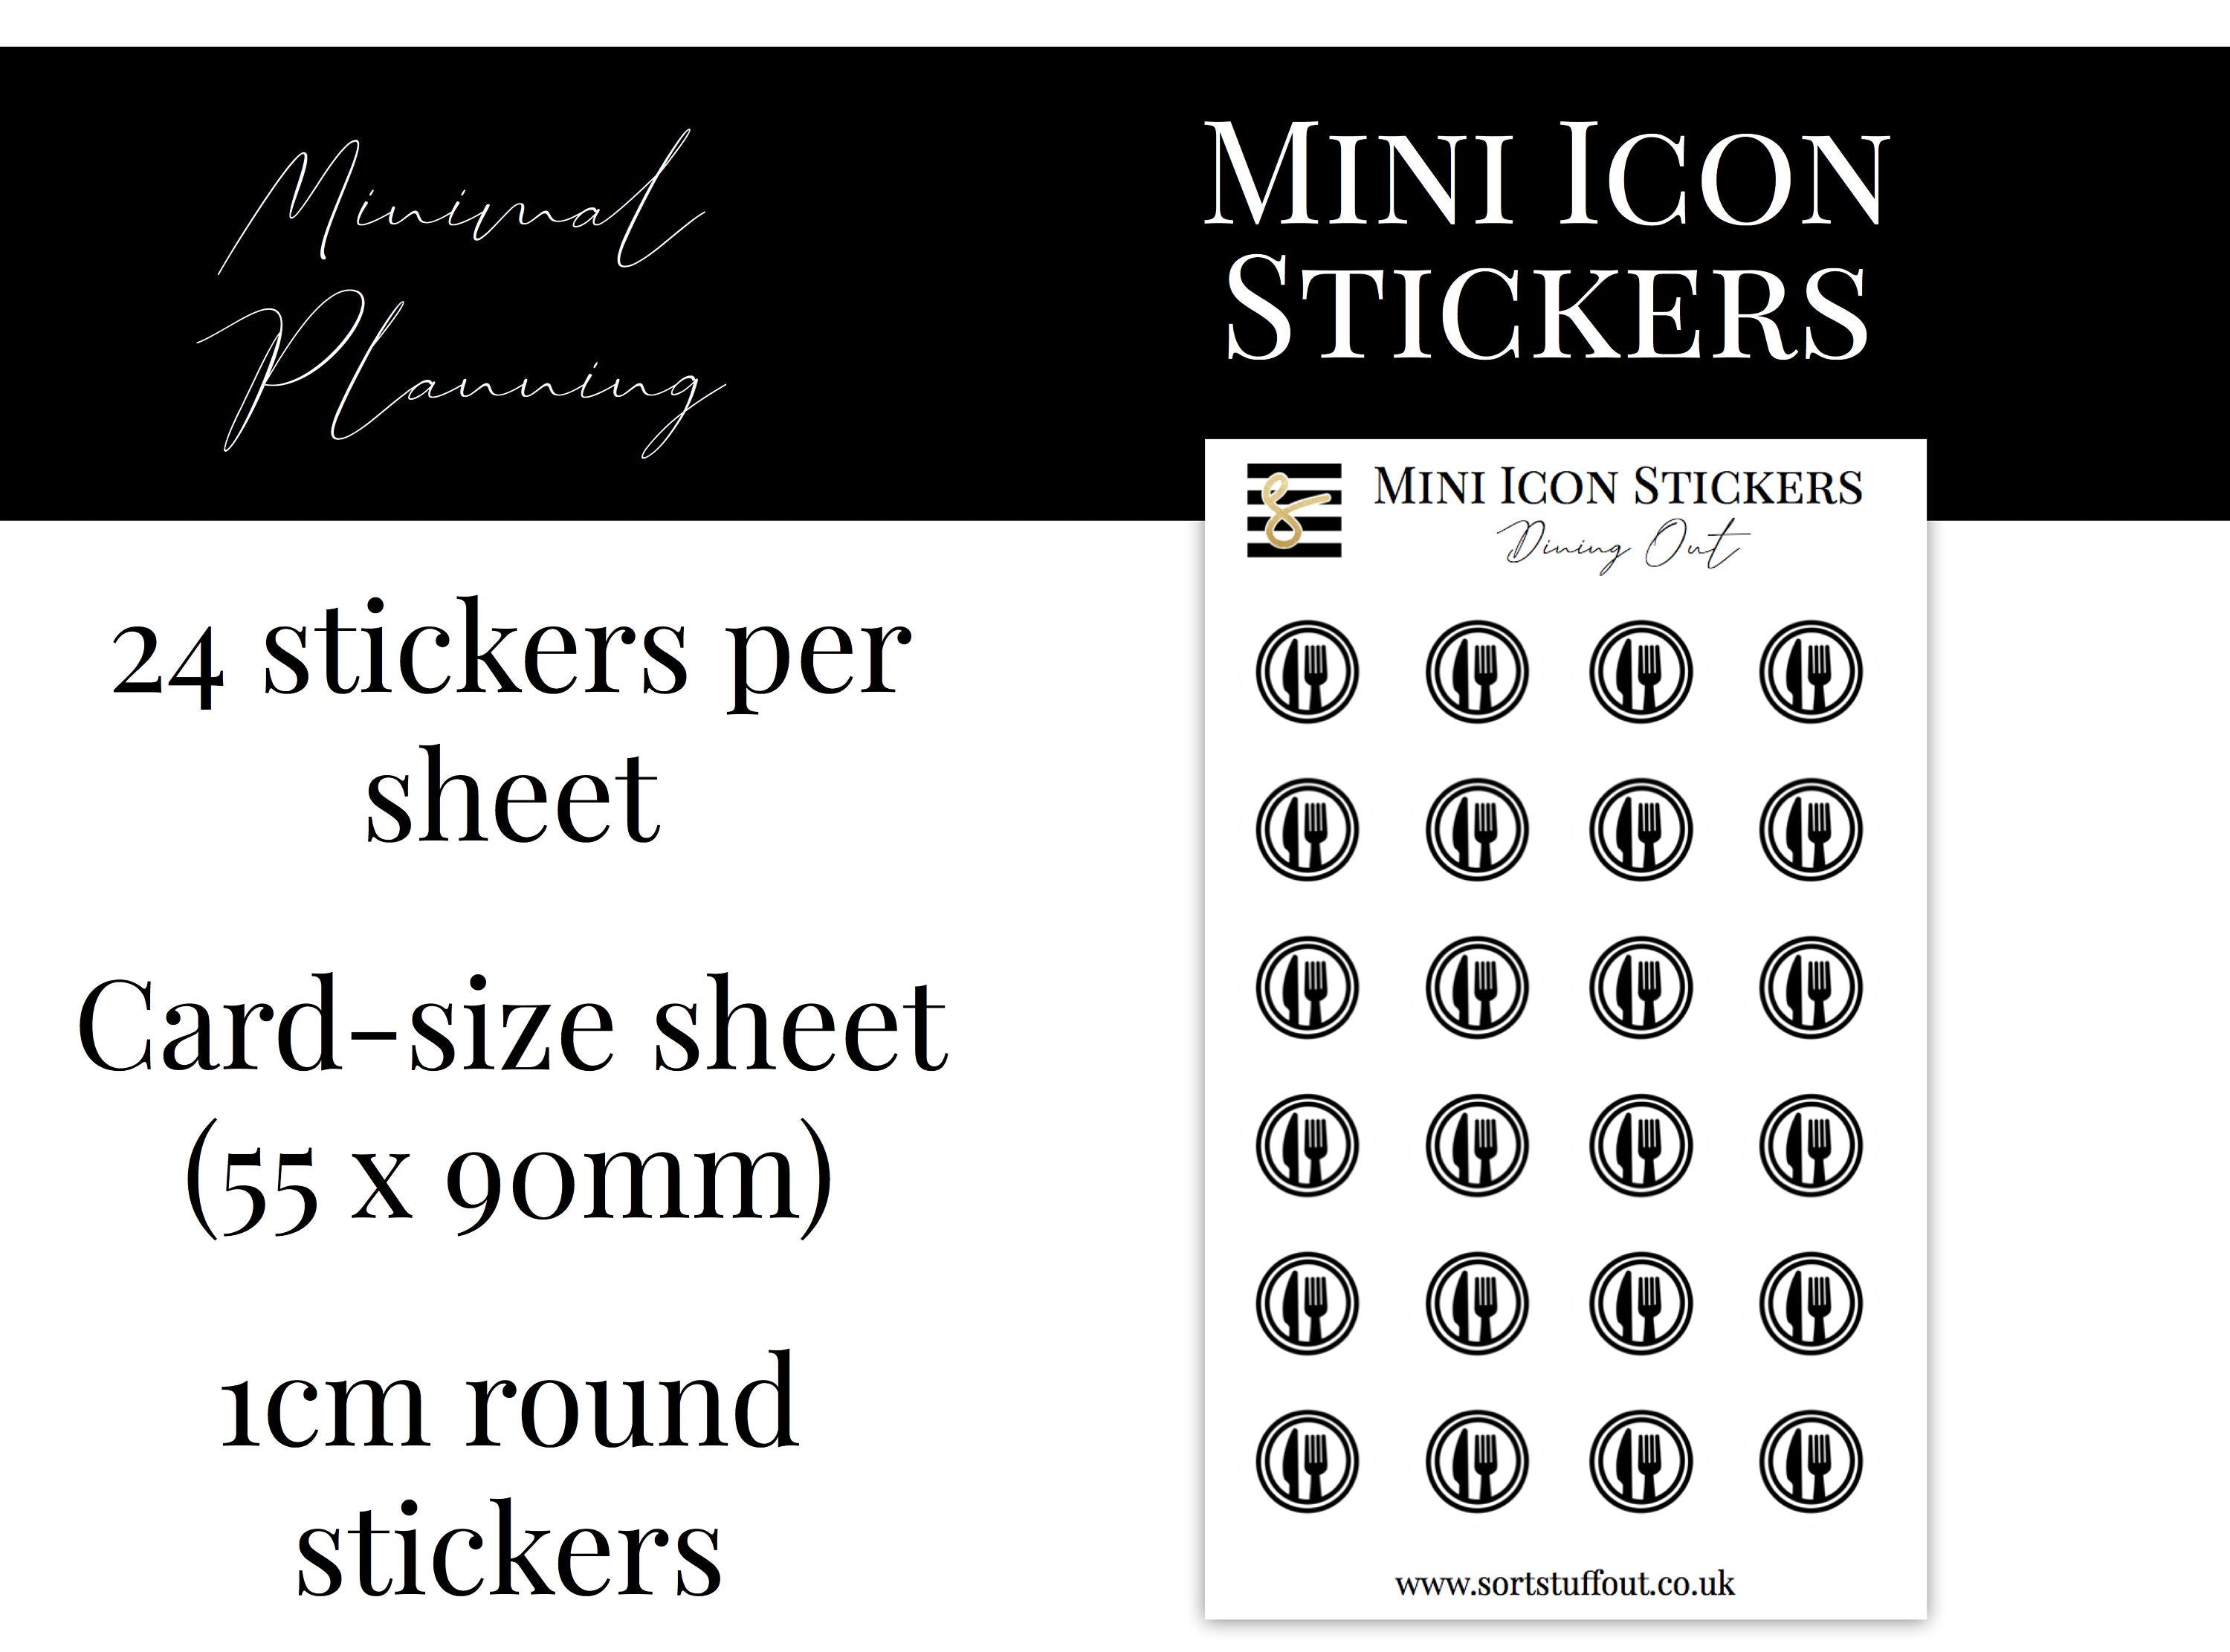 Mini Icon Stickers - Dining Out